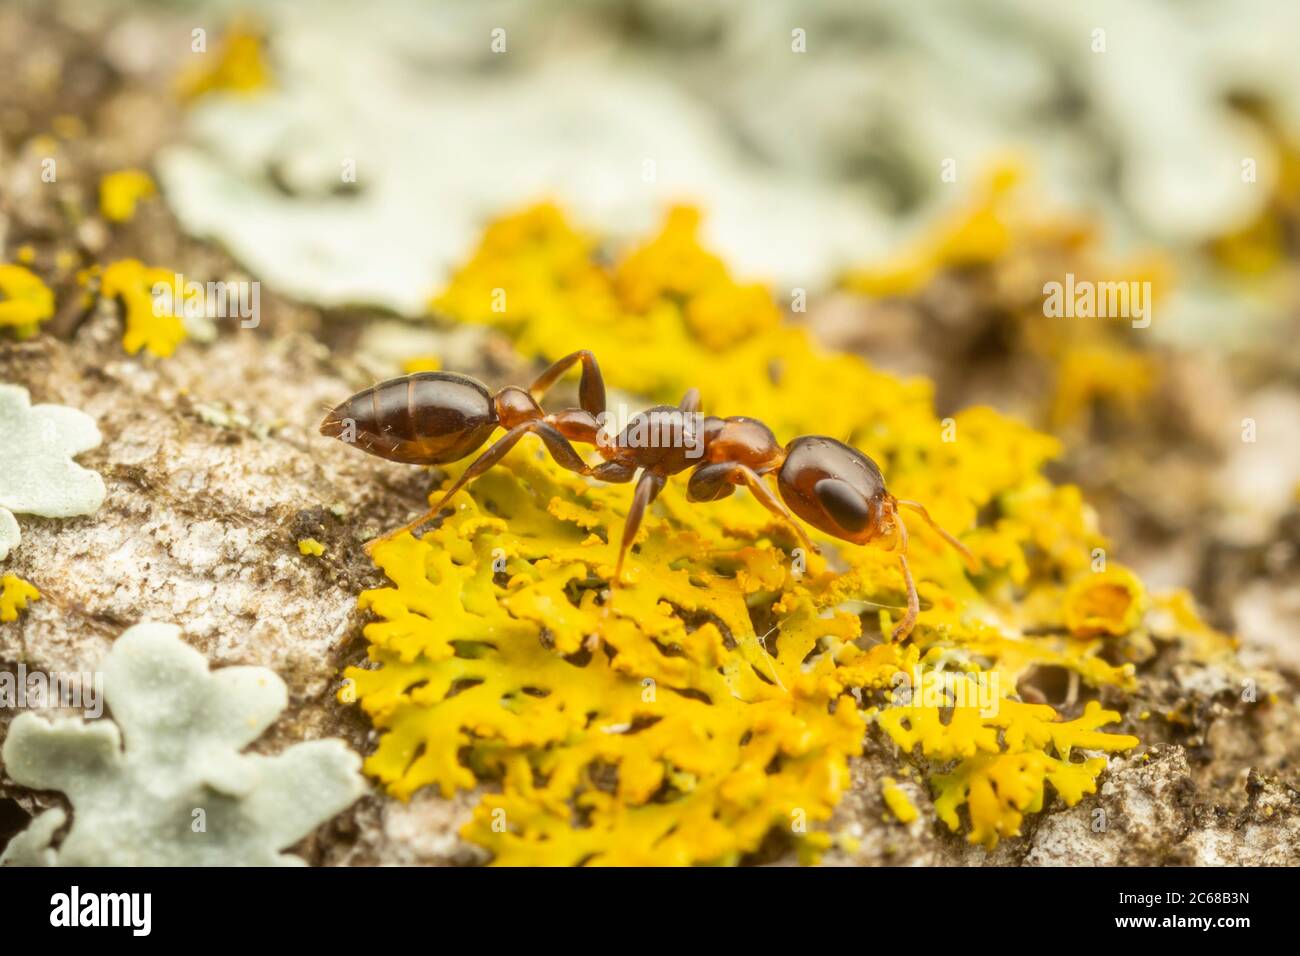 A Twig Ant (Pseudomyrmex ejectus) worker forages on a lichen covered tree trunk. Stock Photo